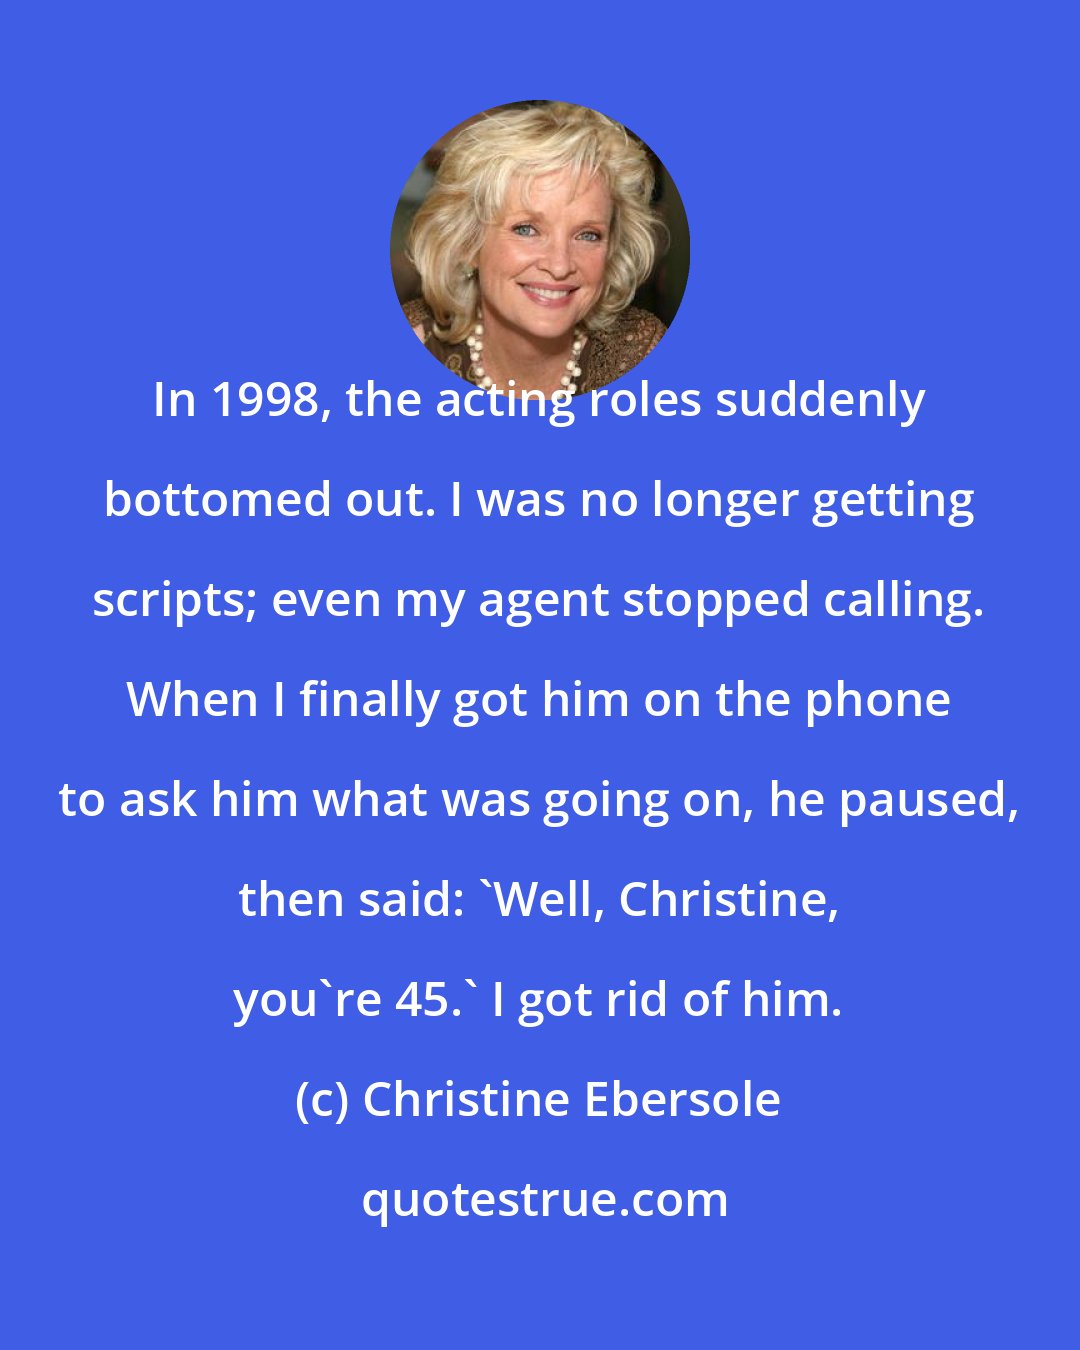 Christine Ebersole: In 1998, the acting roles suddenly bottomed out. I was no longer getting scripts; even my agent stopped calling. When I finally got him on the phone to ask him what was going on, he paused, then said: 'Well, Christine, you're 45.' I got rid of him.